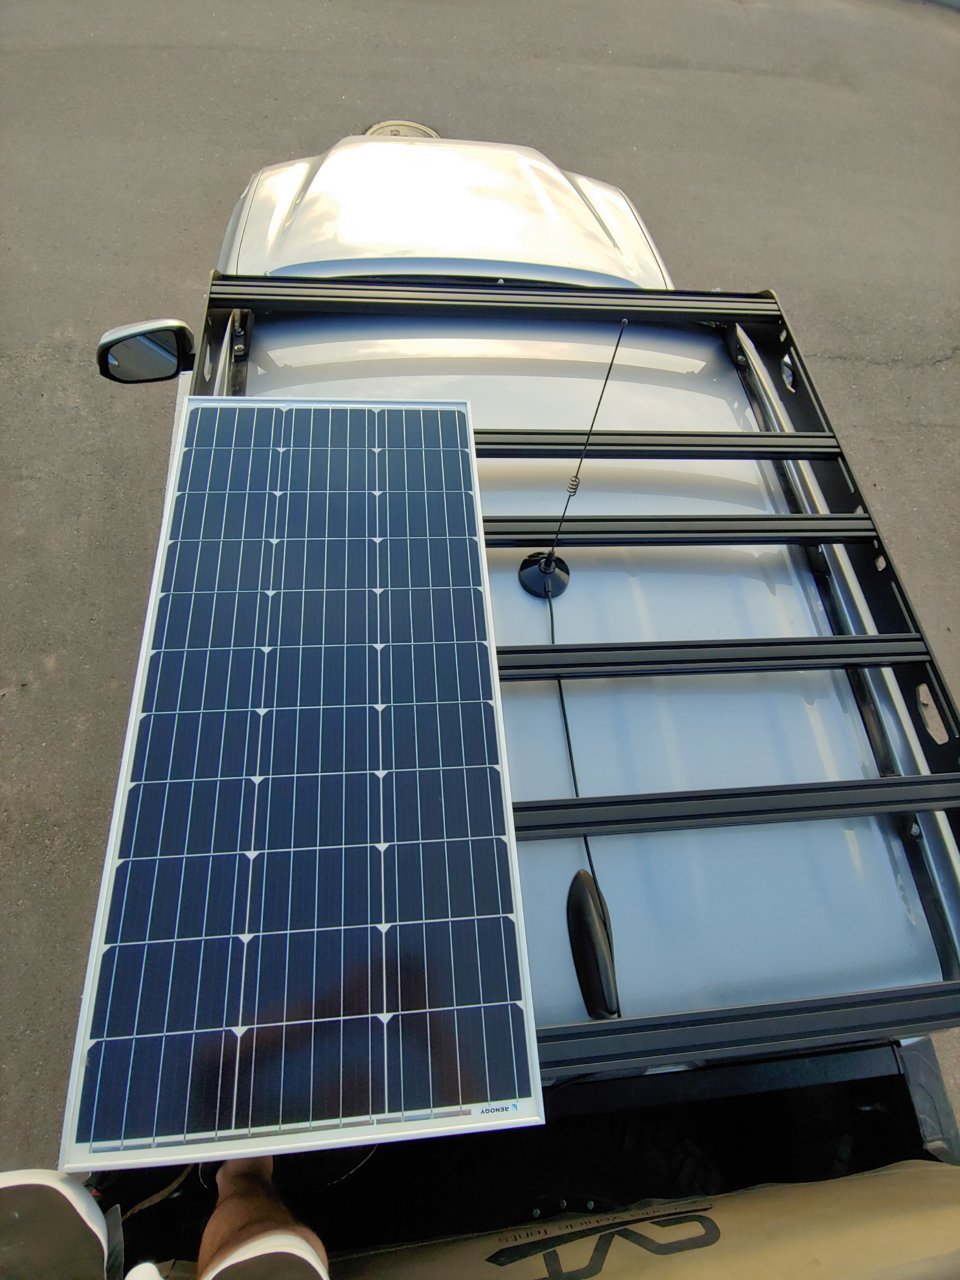 Solar Panel Roof Mount Build With Articulating Arm World